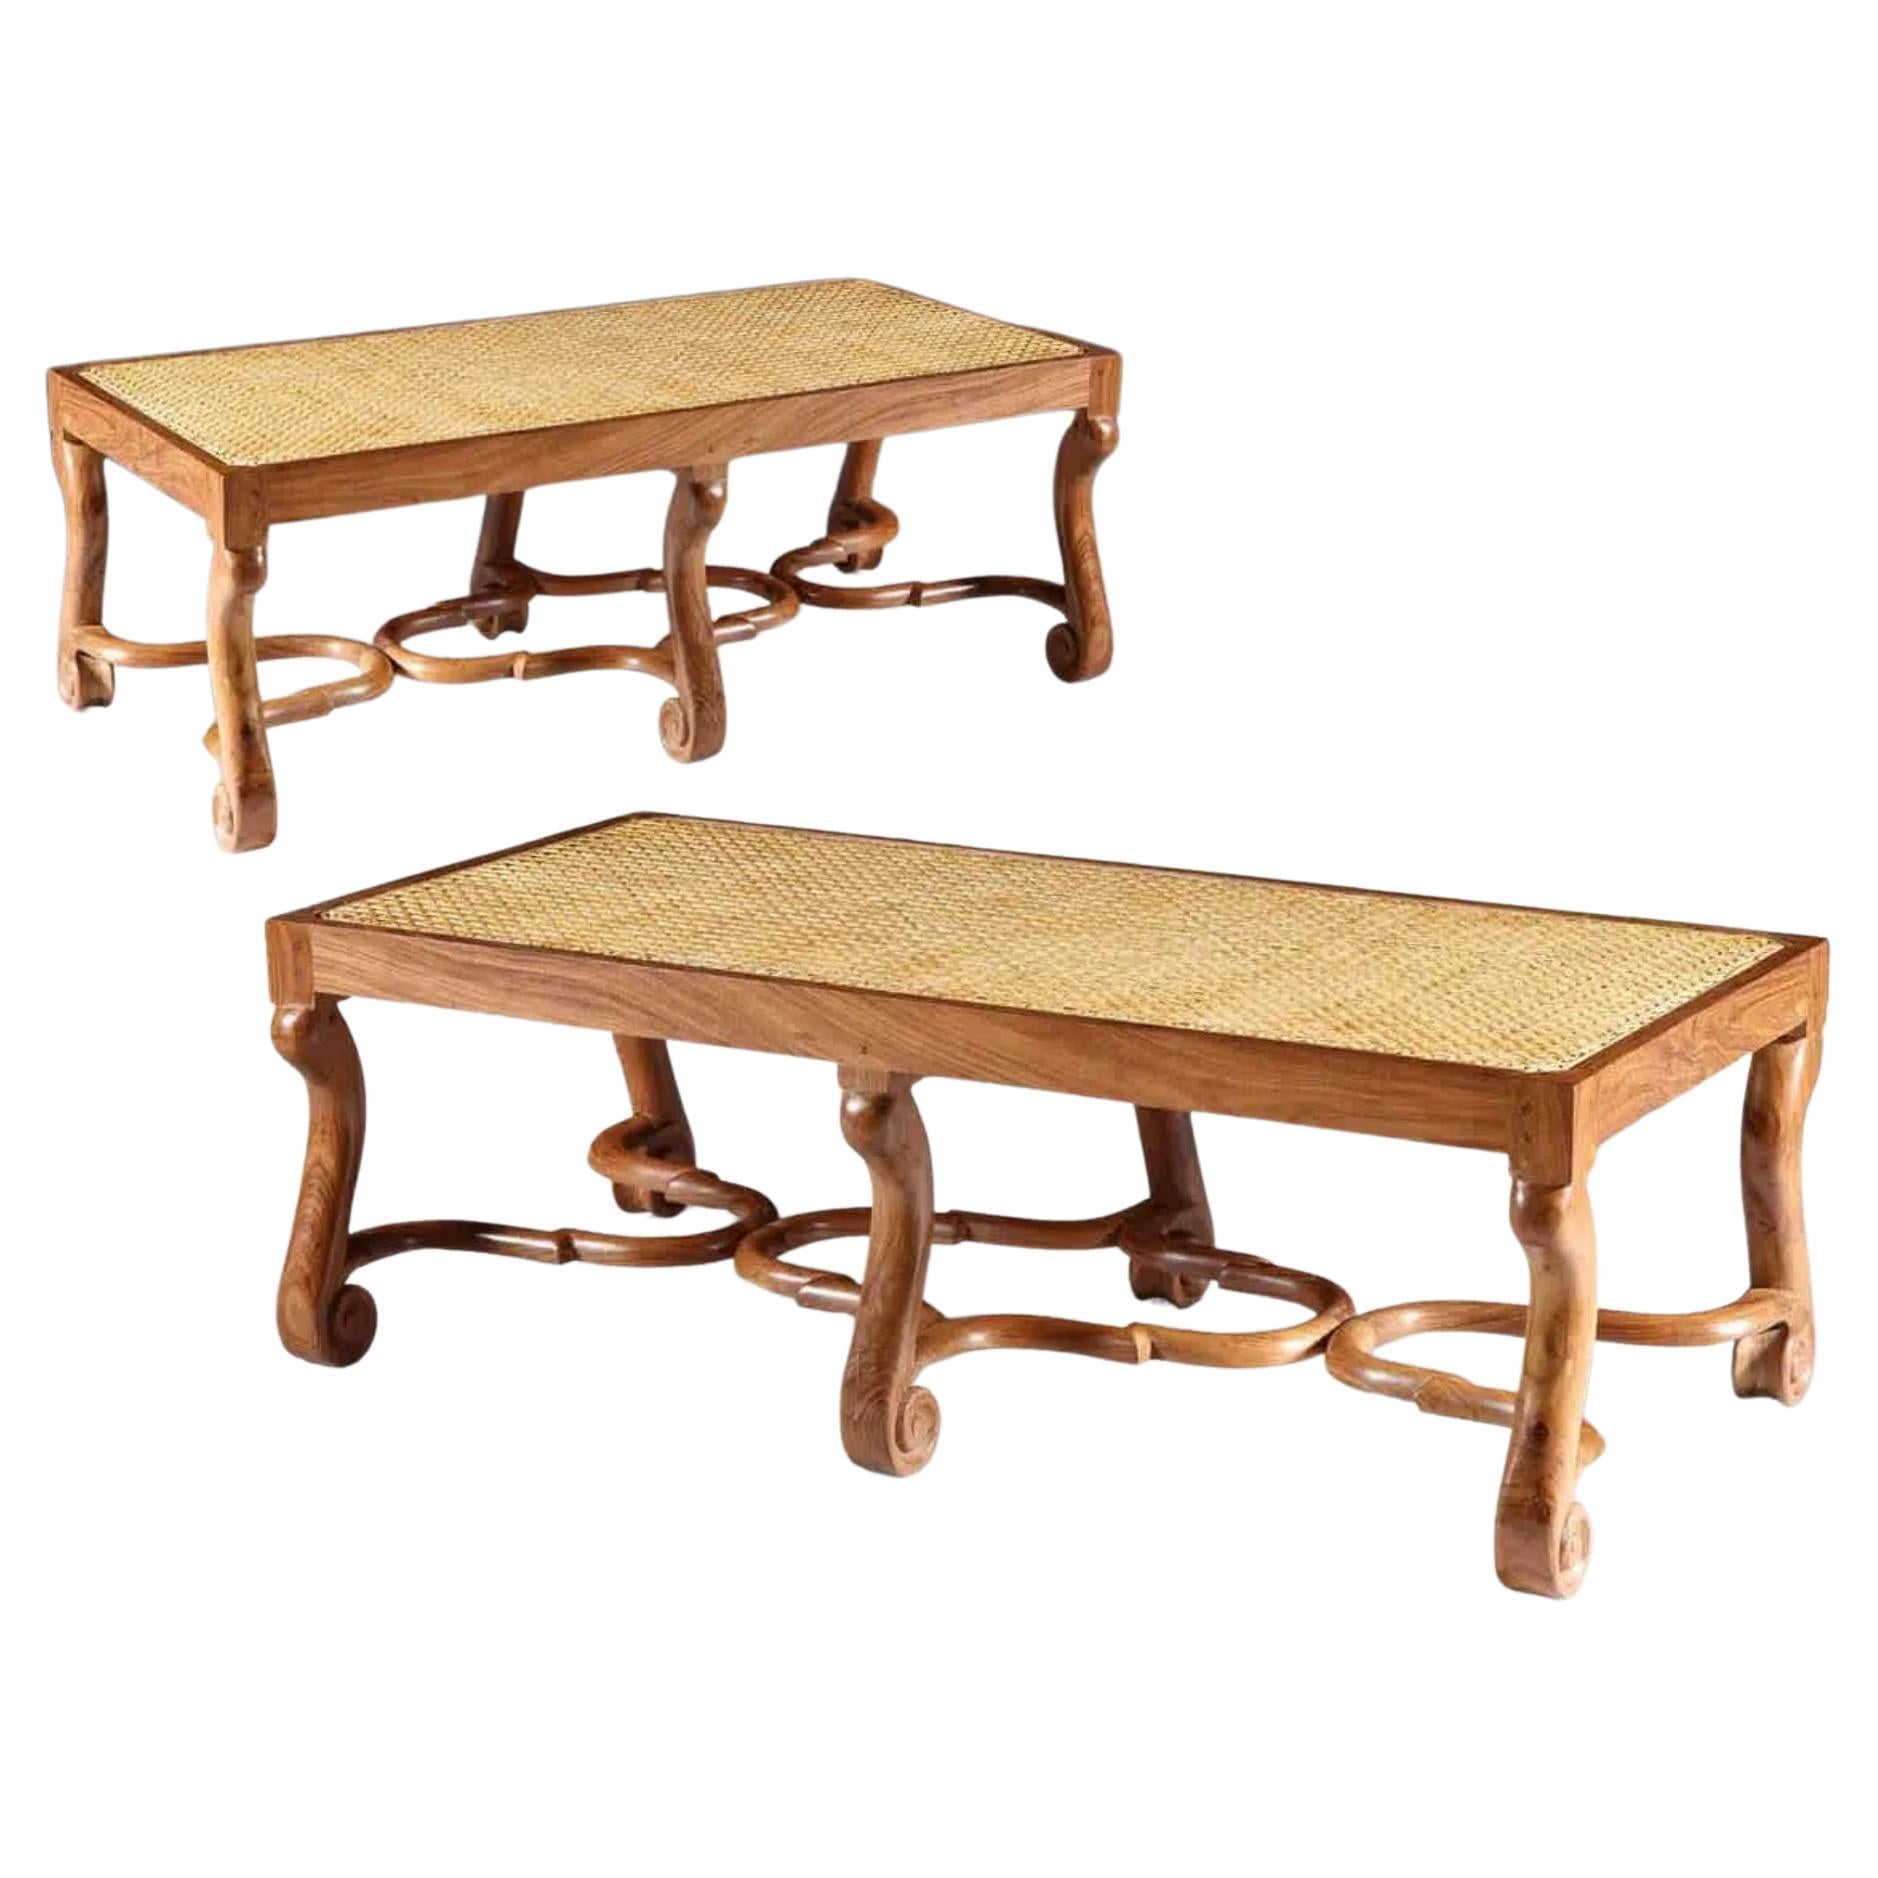 Pair of Walnut Long Caned Benches, 20th Century For Sale